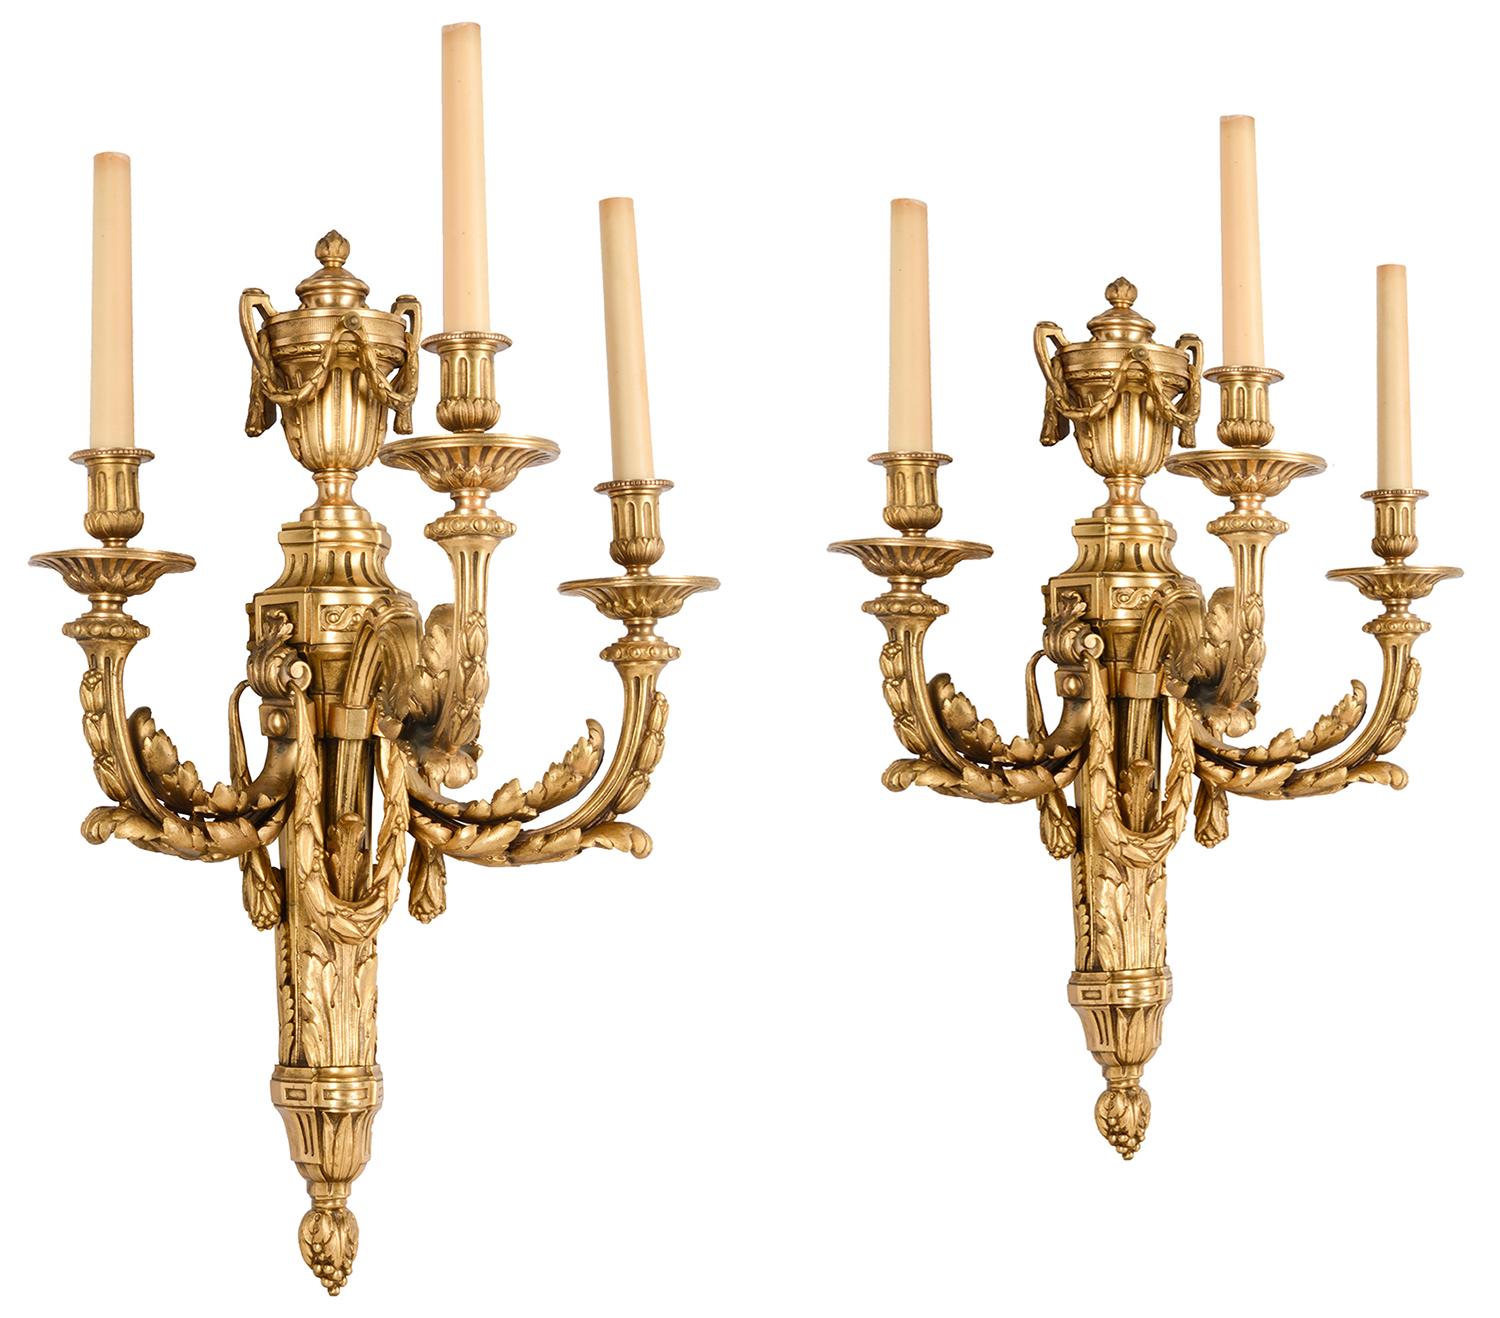 A good quality pair of late 19th century gilded Ormolu three branch wall lights, each with classical two handled urns and scrolling foliate swags, in the Louis XVI style. Measures: 63cm (25